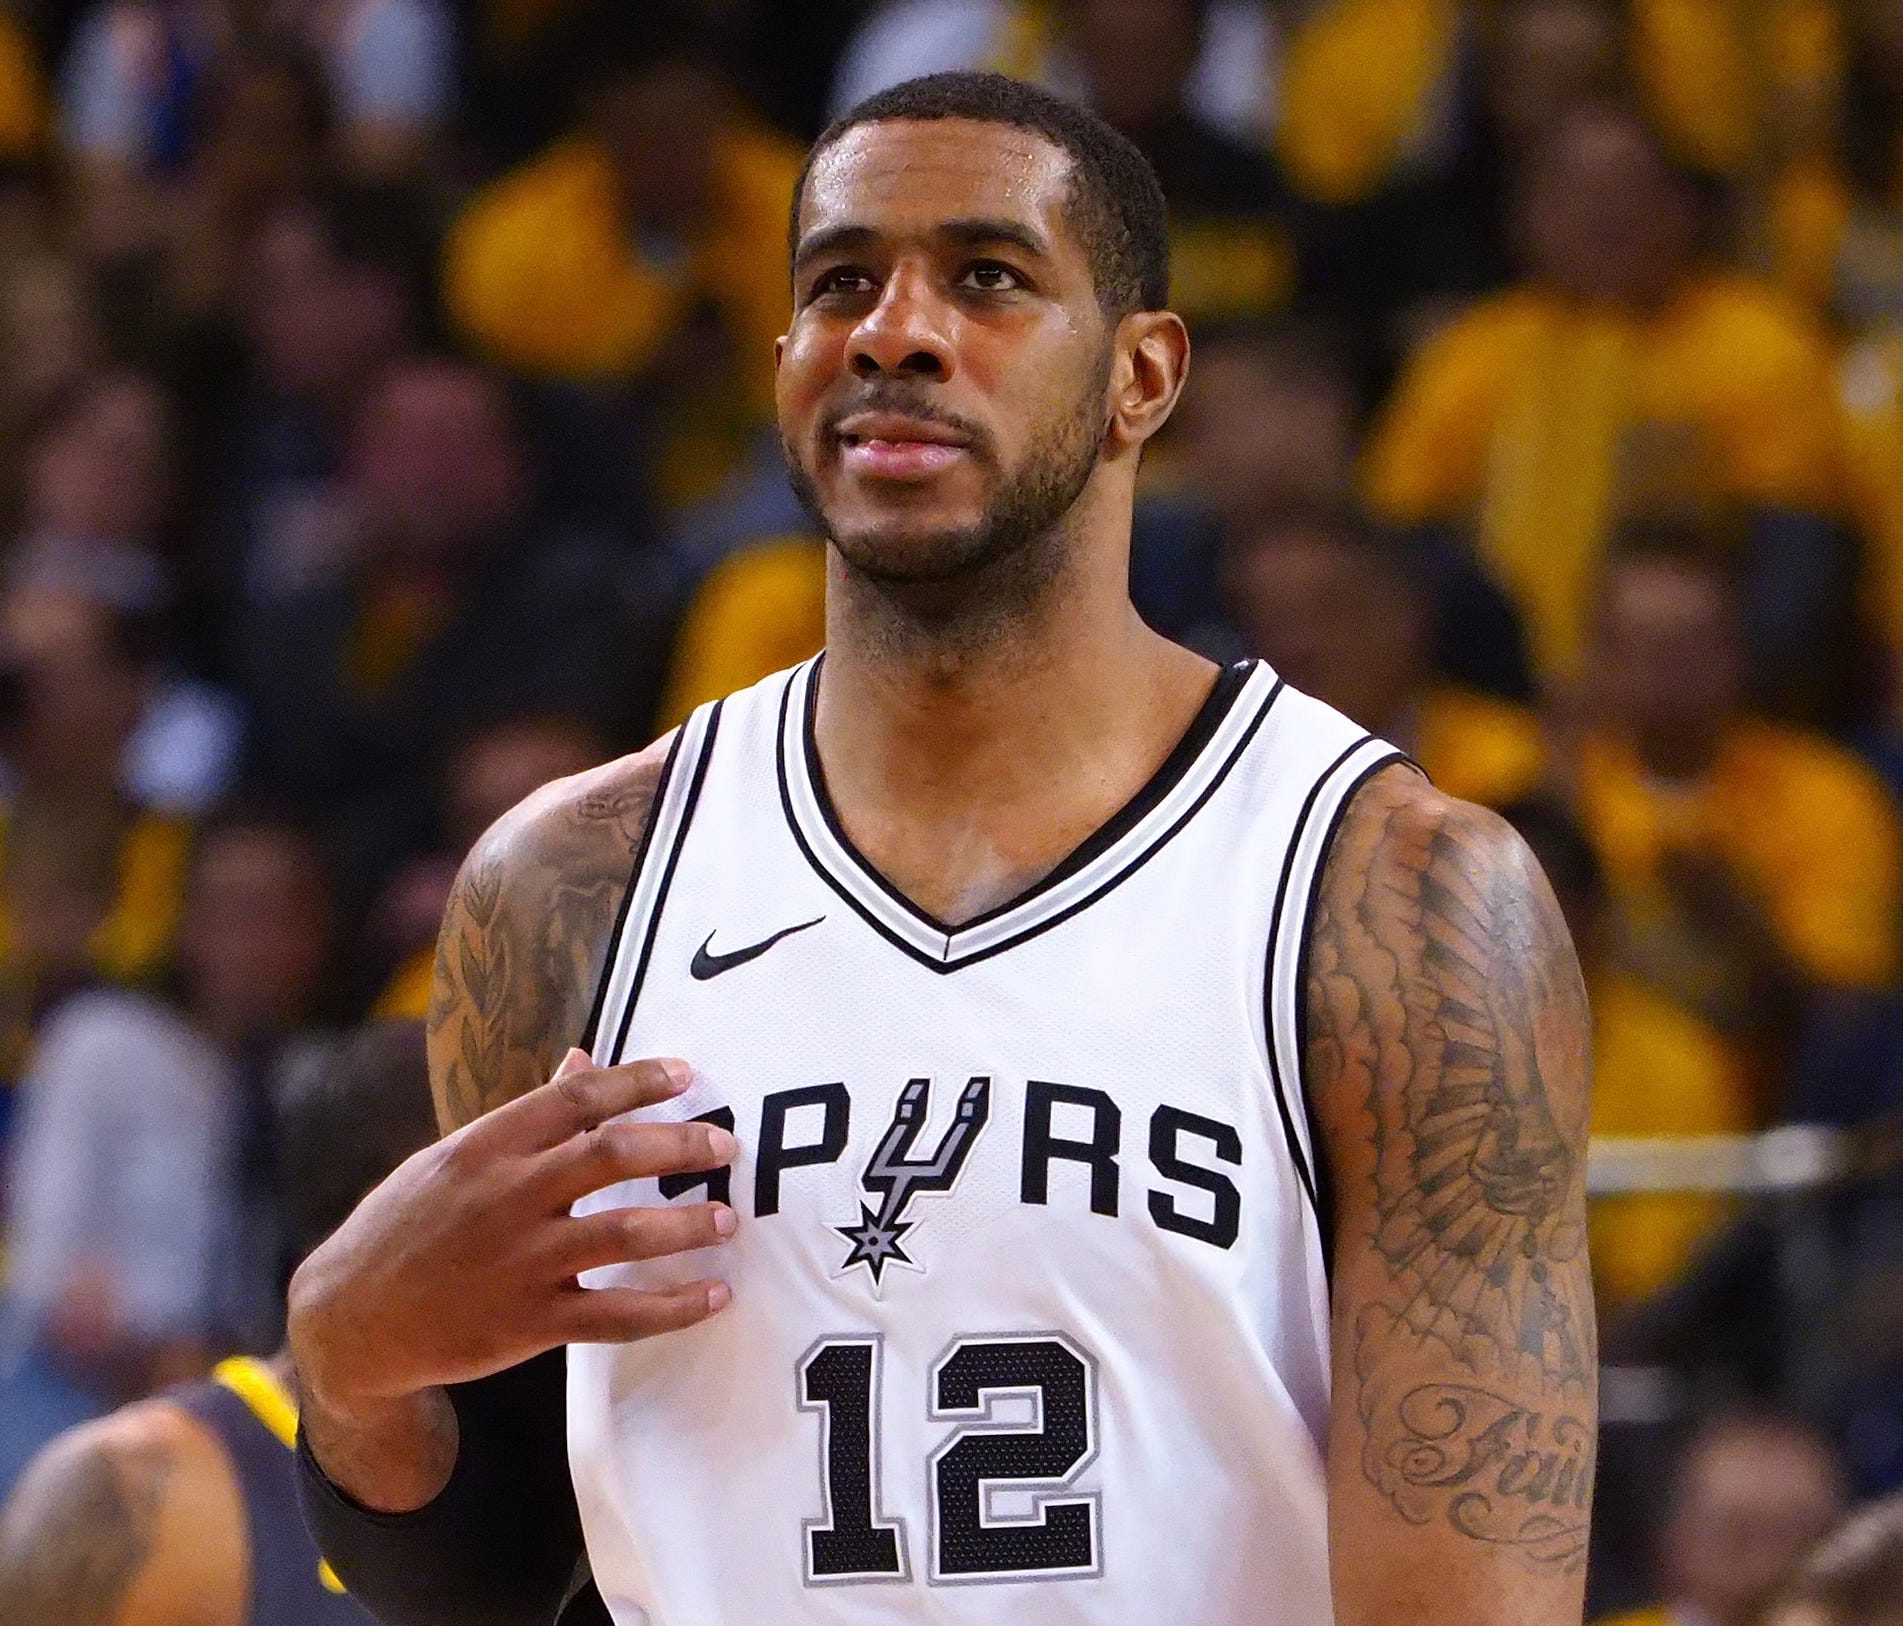 LaMarcus Aldridge reacts during the Spurs' Game 2 loss to the Warriors.